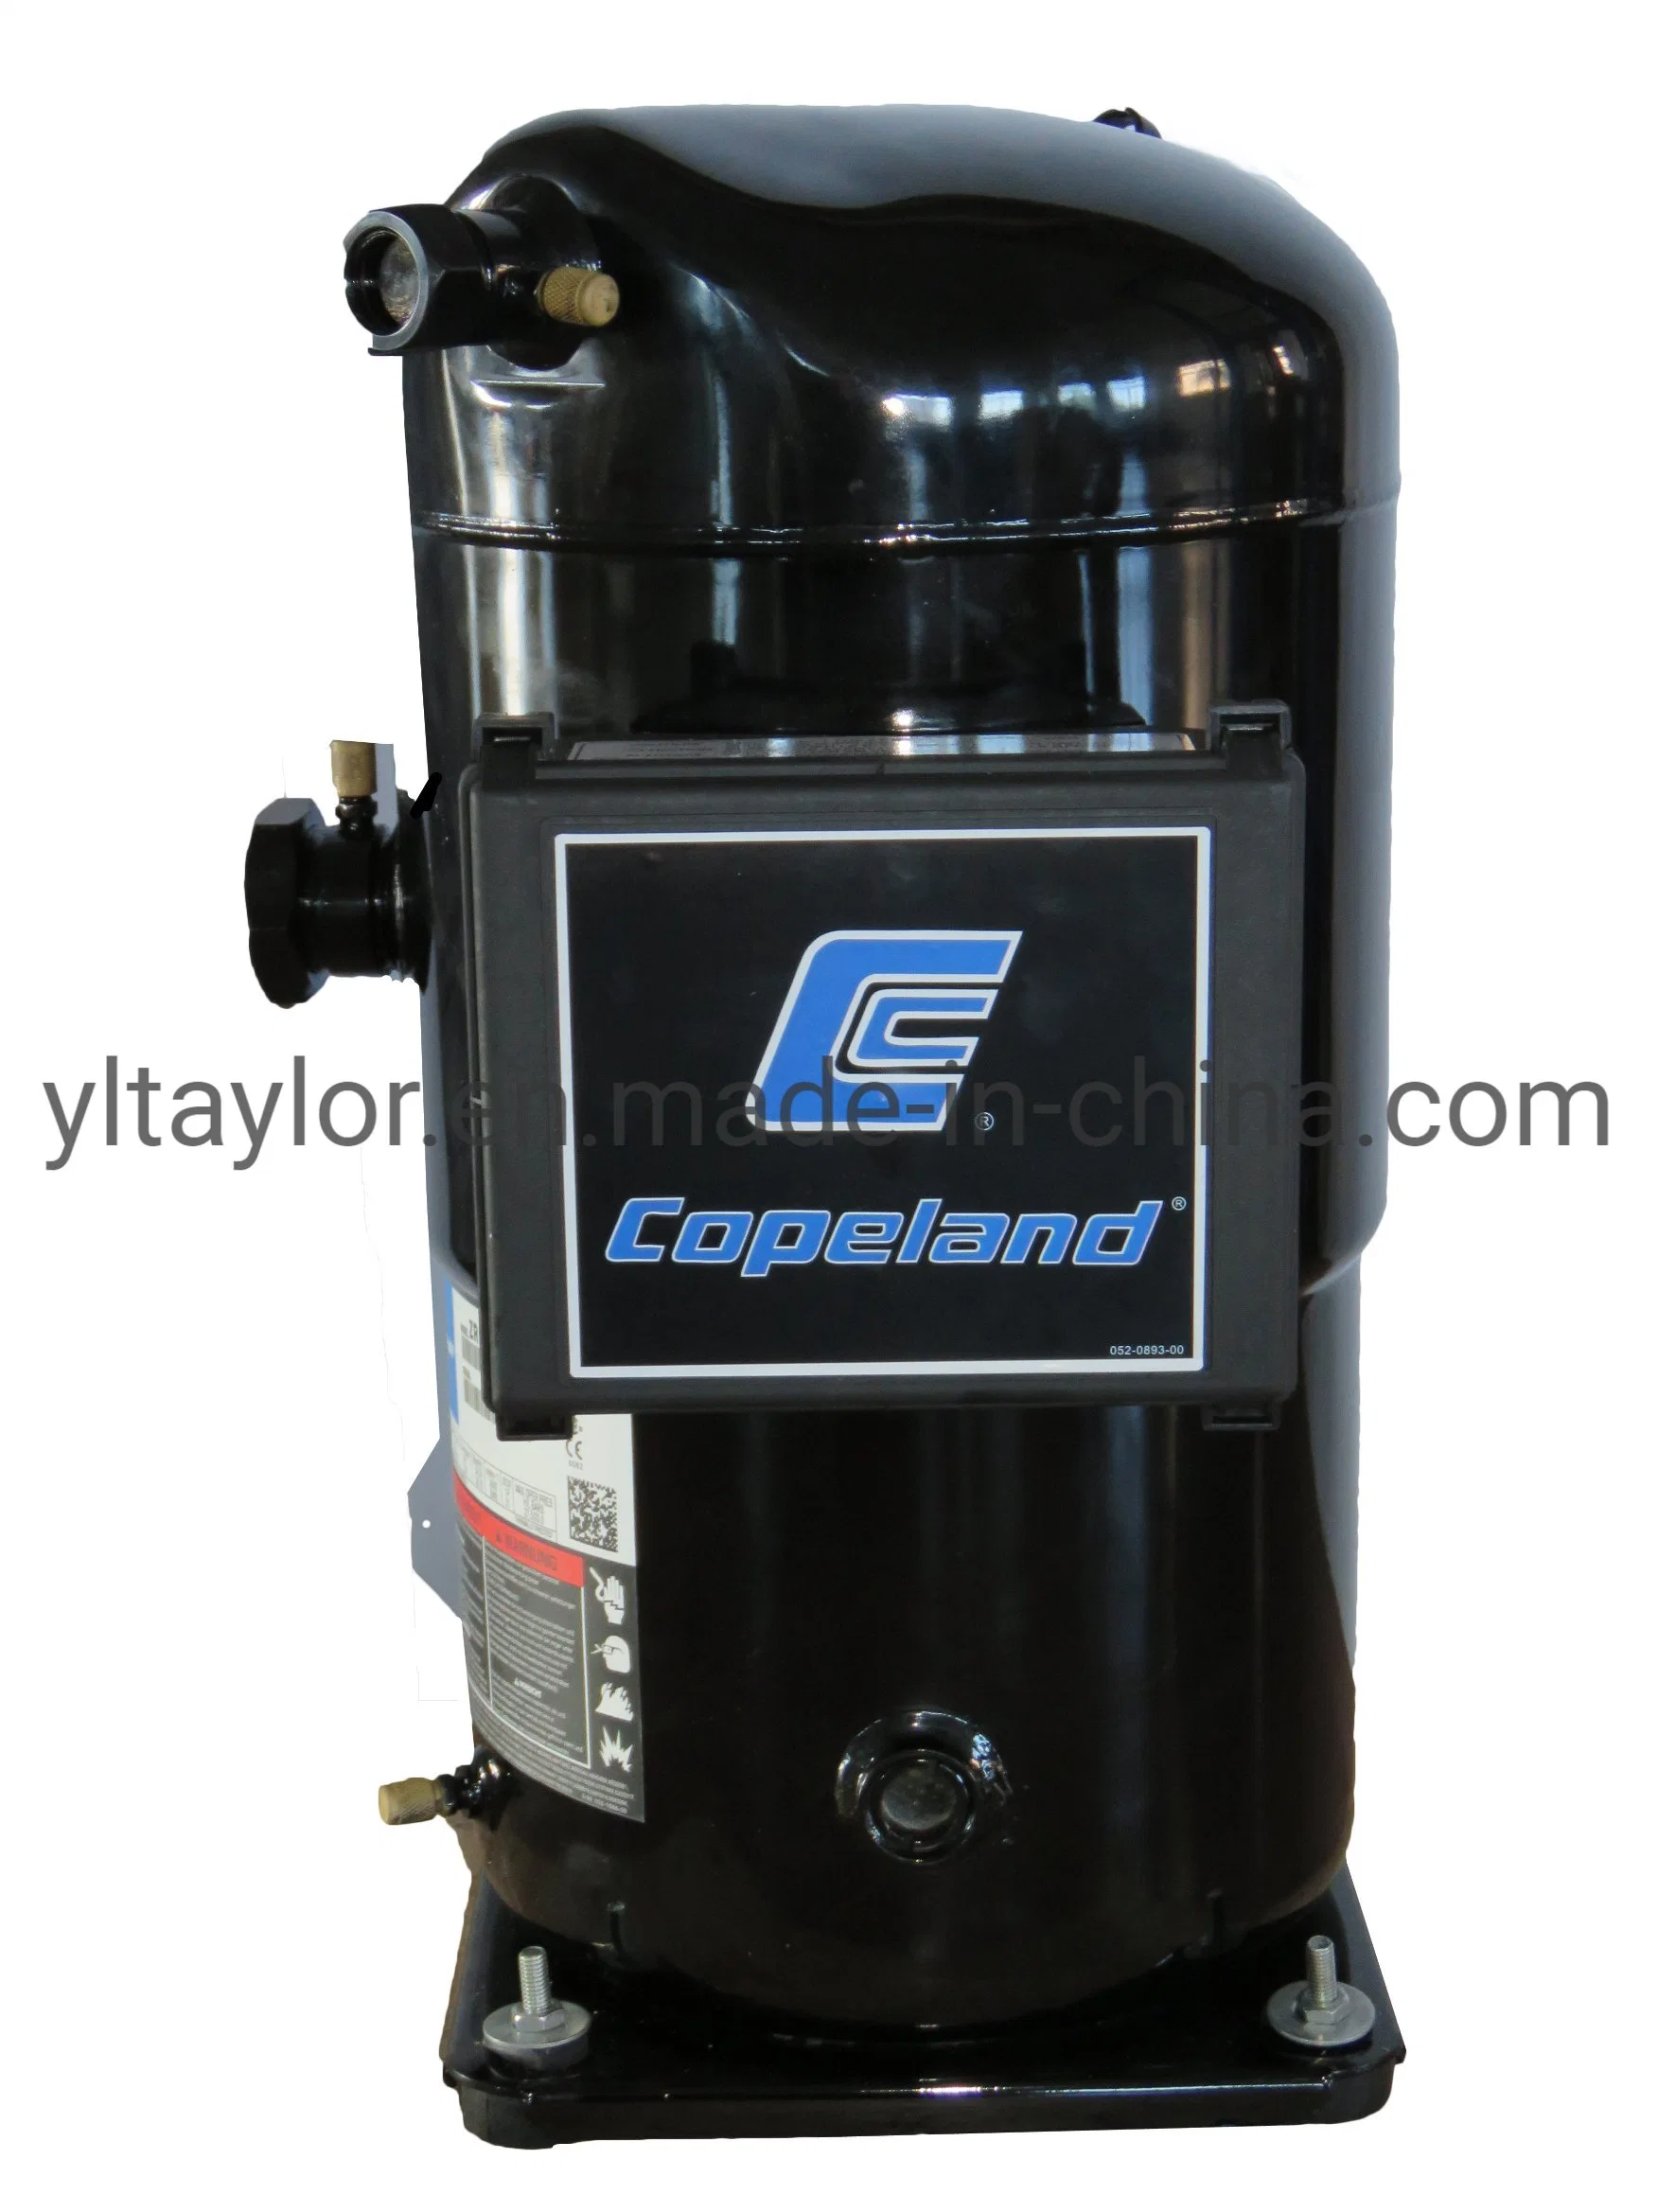 Cope Land Scroll Compressor Zw102hsp-Tfp-522 Air Conditioning Compressor